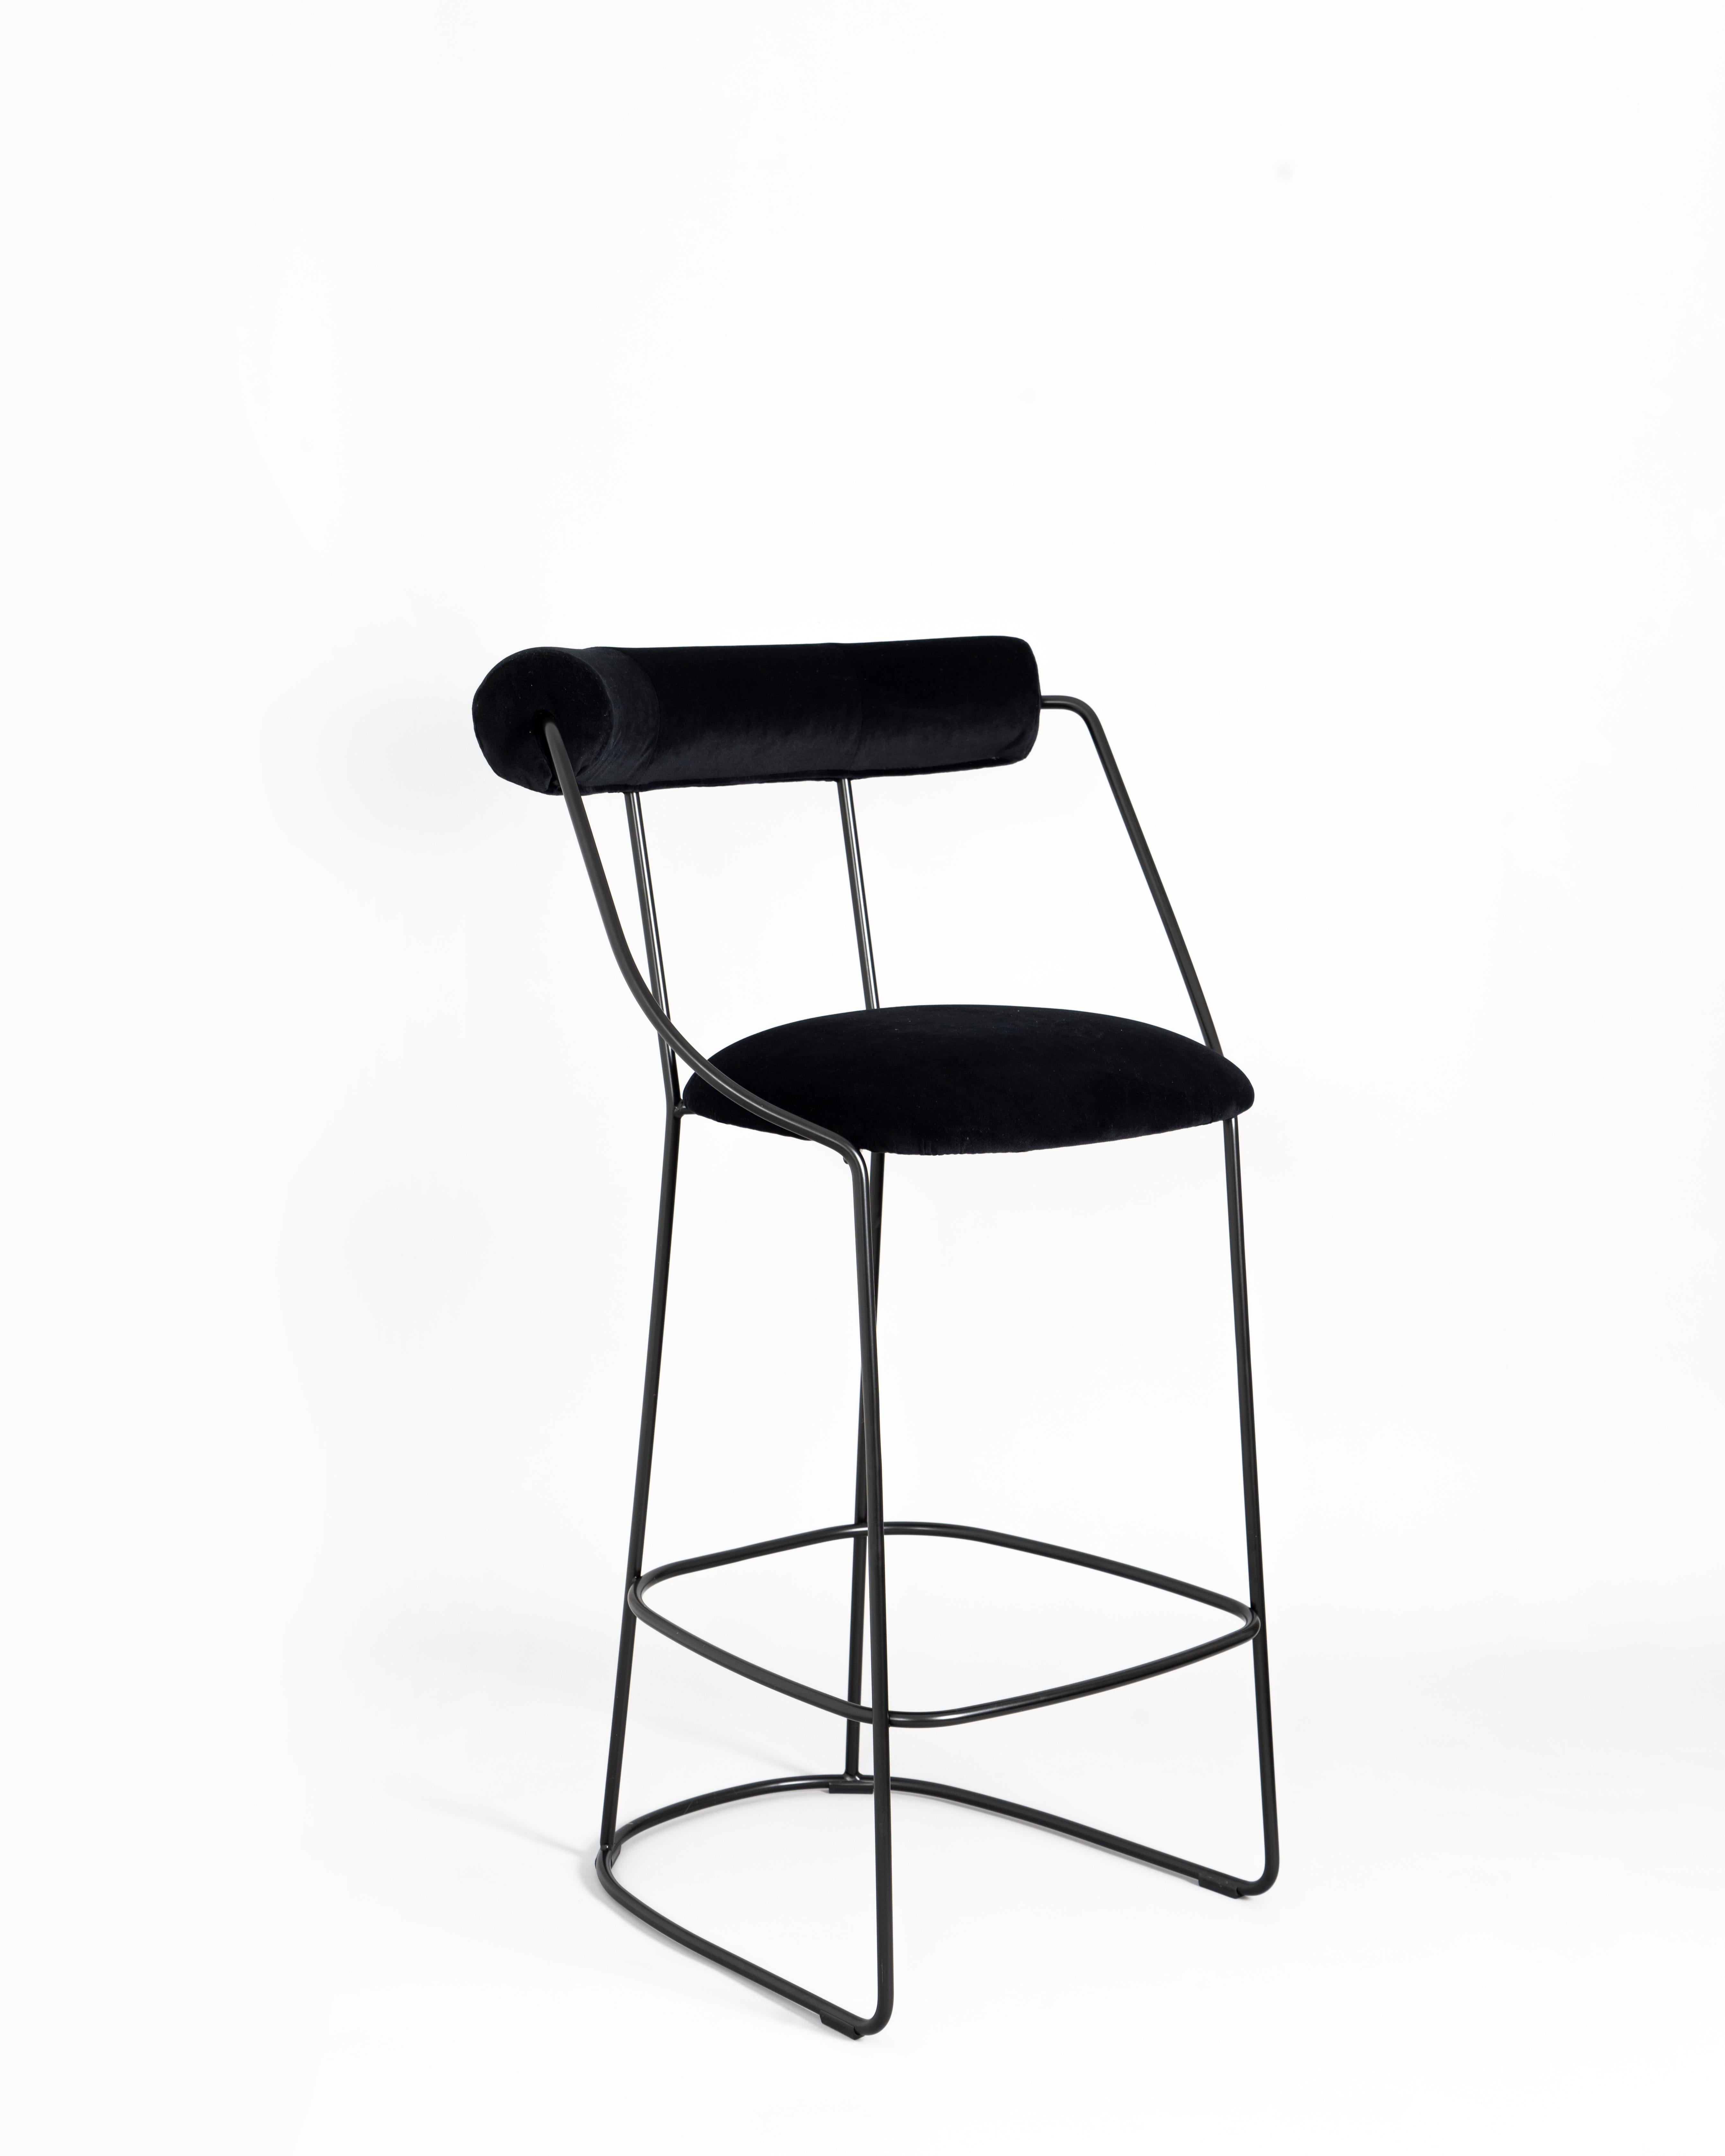 Other Fran Black Stool by LapiegaWD For Sale